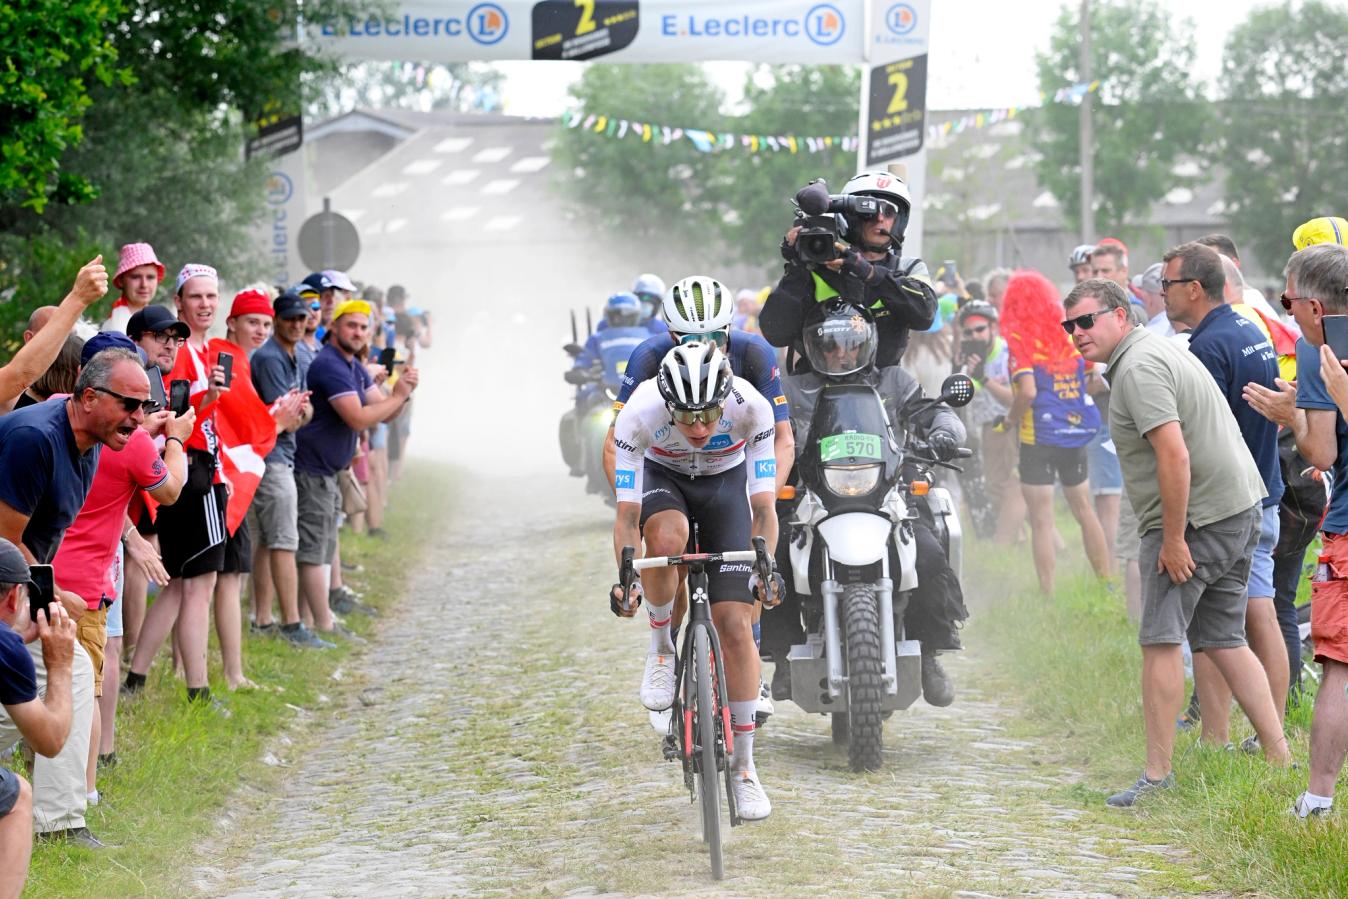 Tadej Pogačar may speak of defensive racing, but his actions on the cobbles of last year's Tour de France were anything but